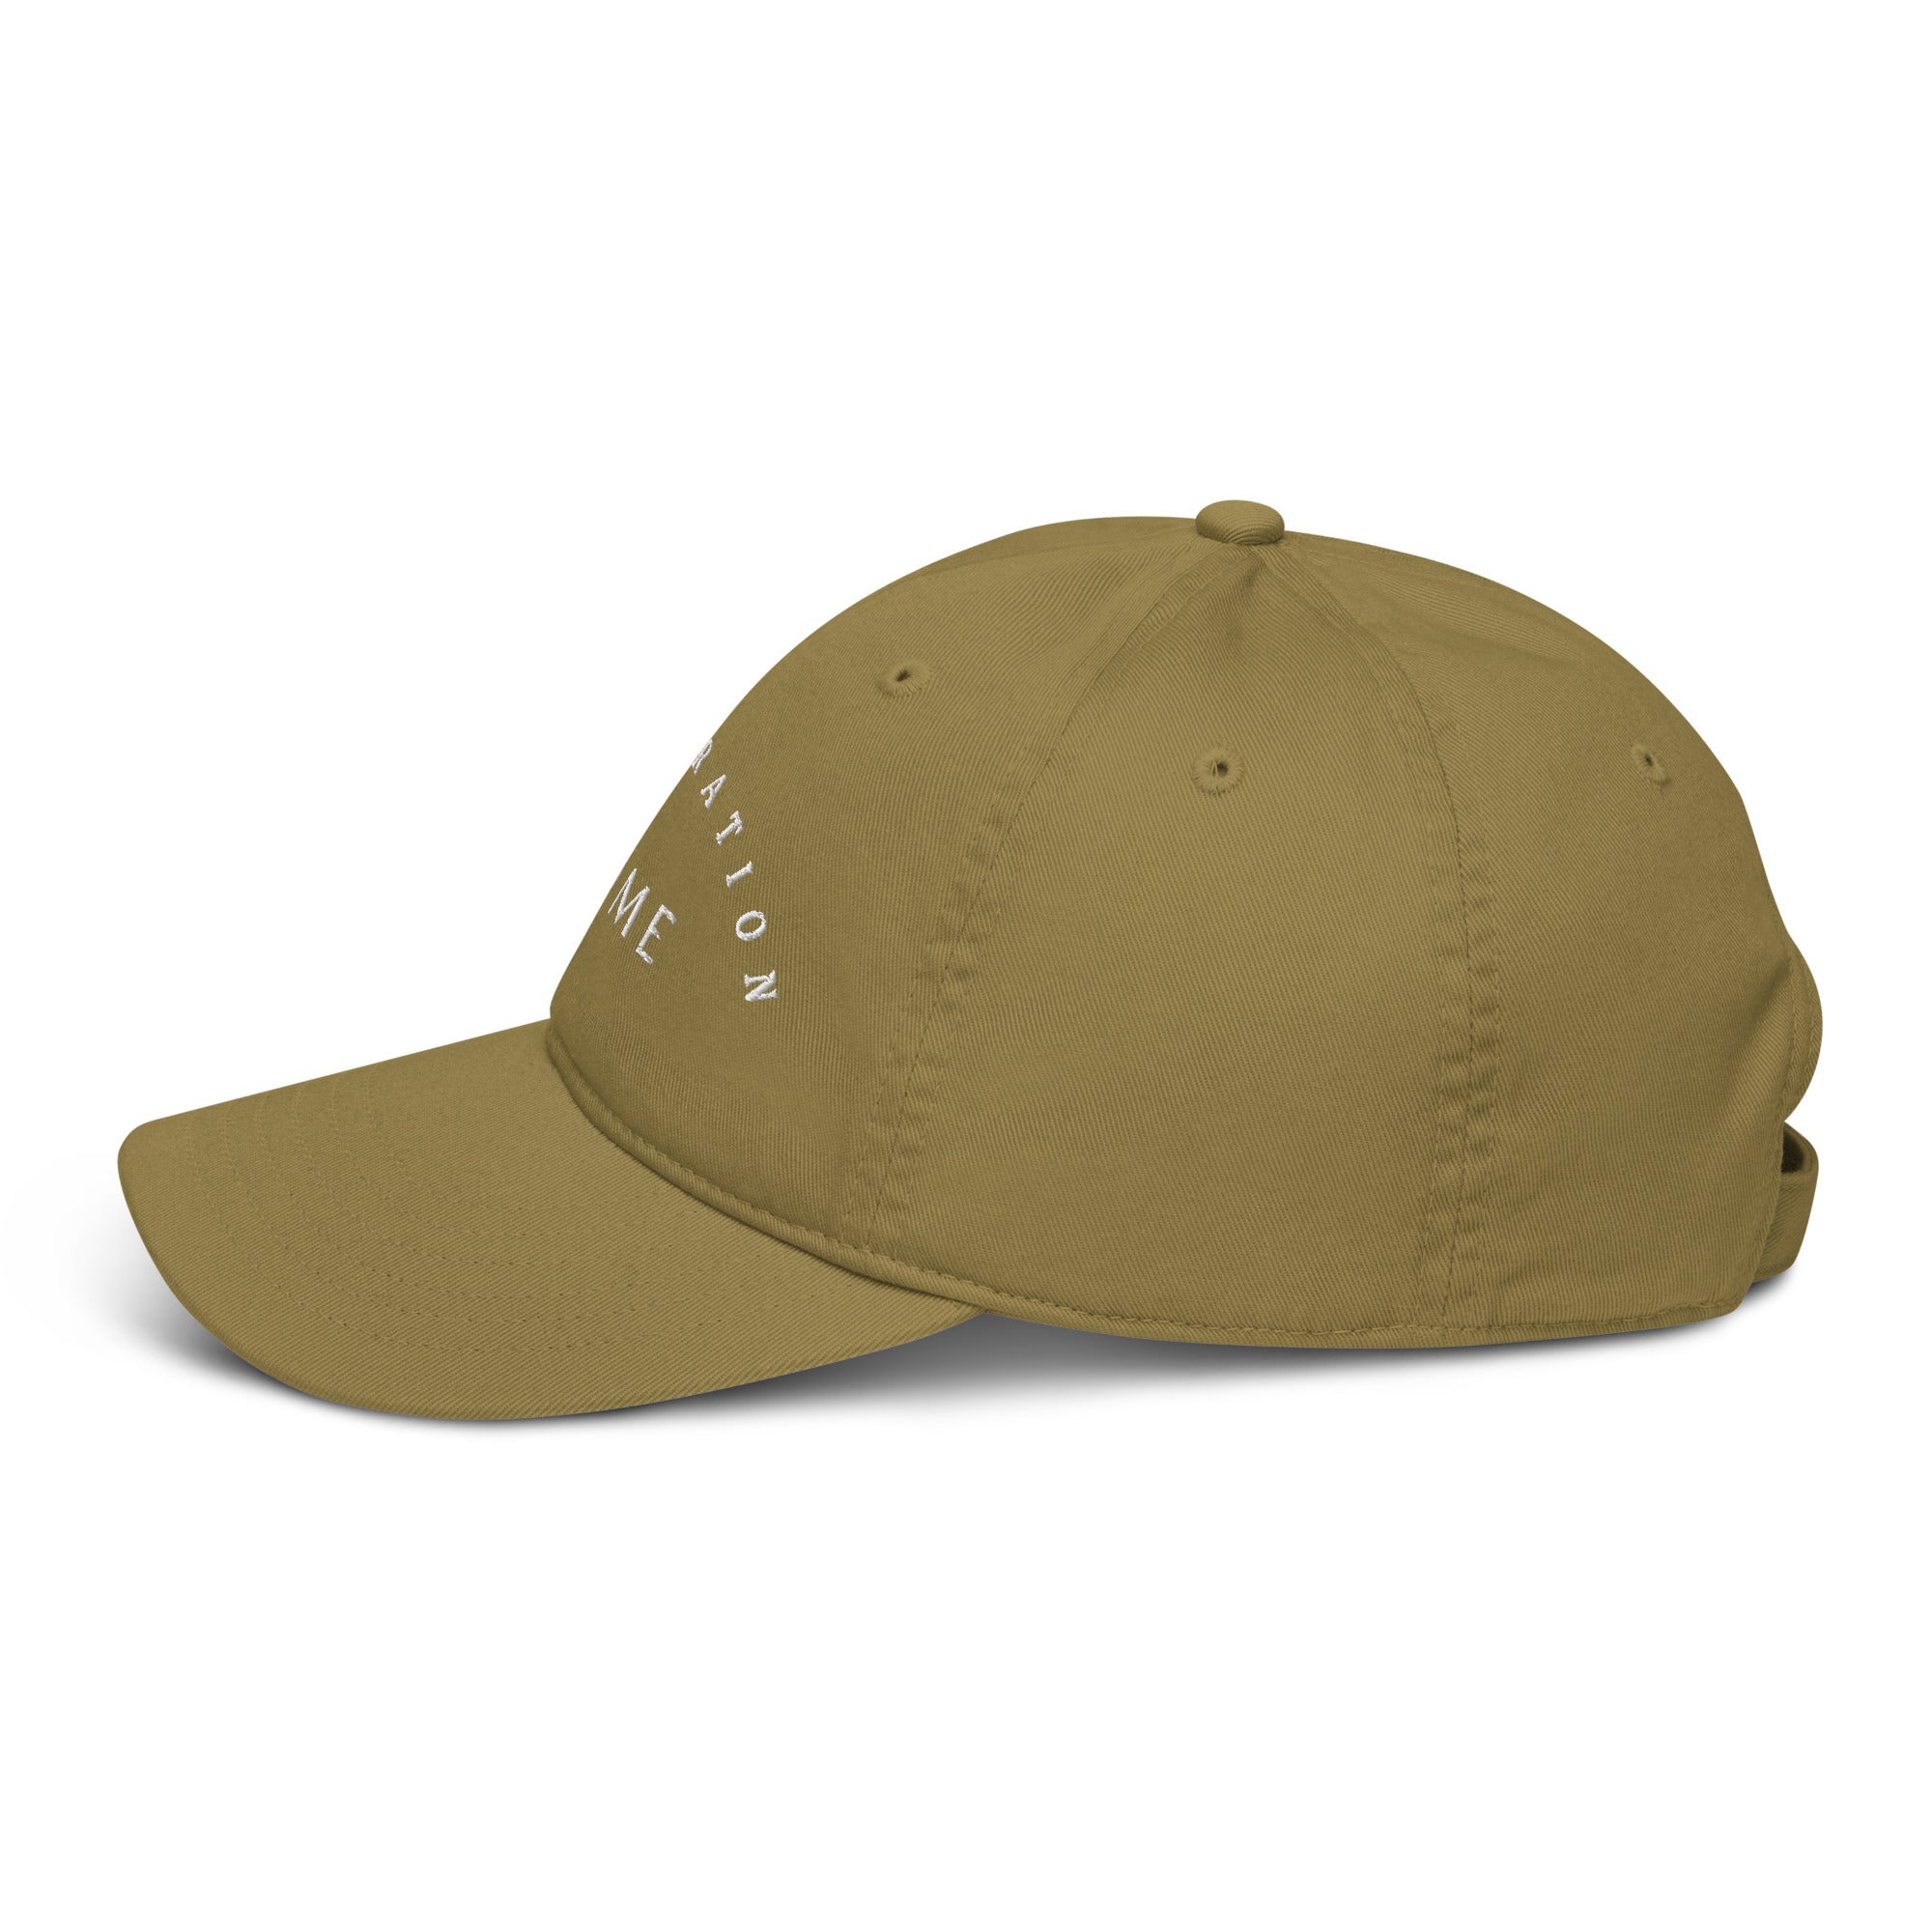 Dark tan "dad hat" from the side.